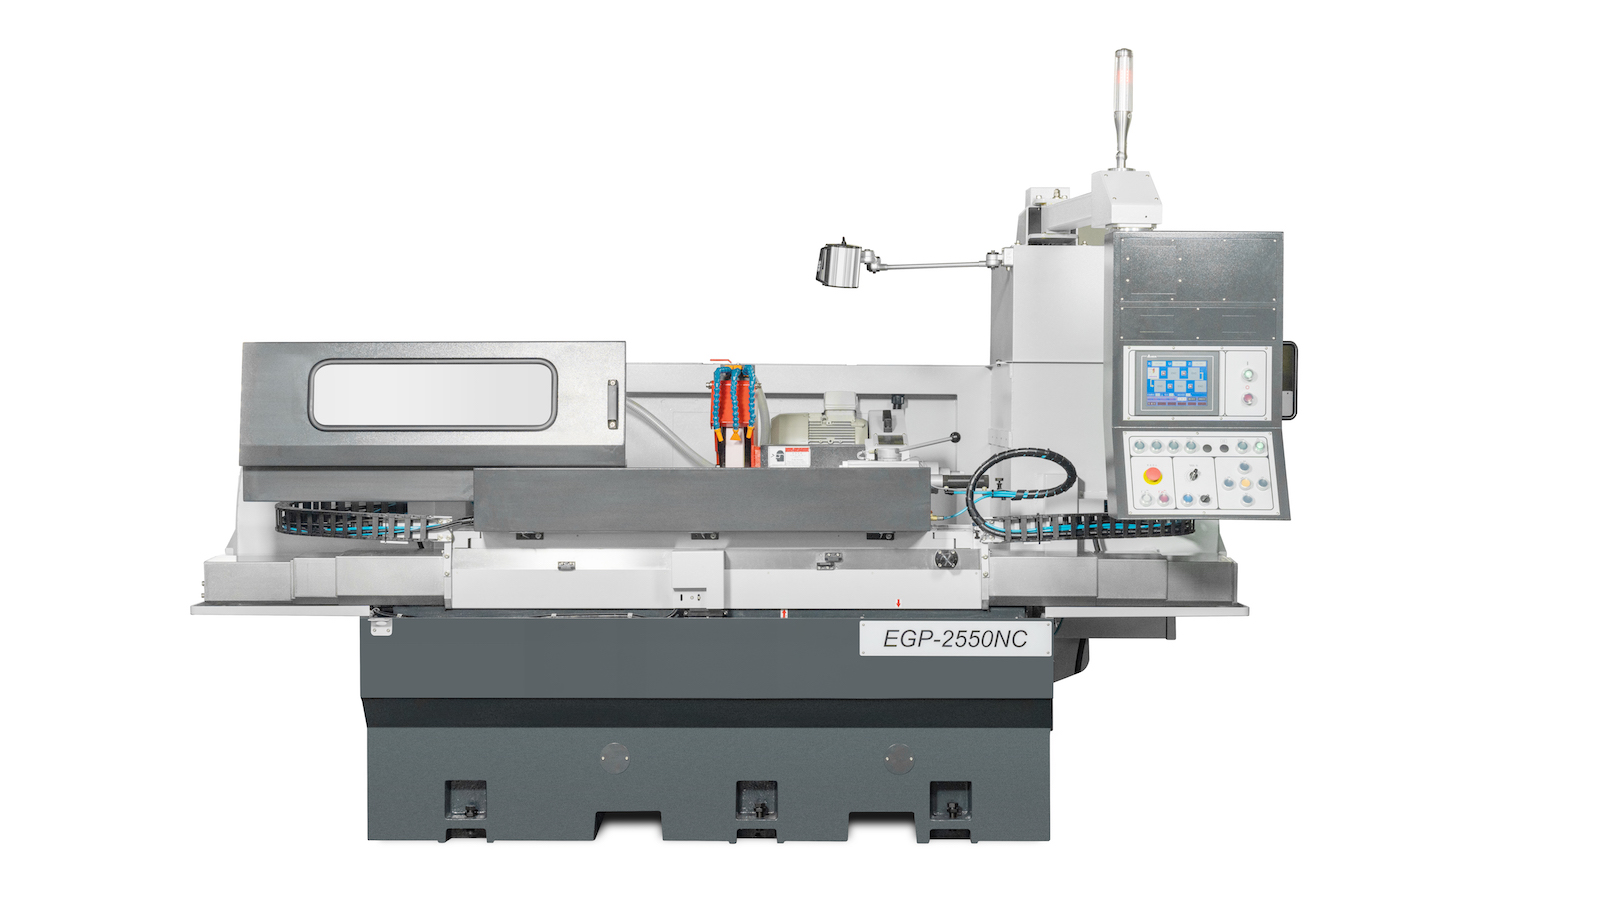 Manufacturers of Automatic Infeed CNC Grinders